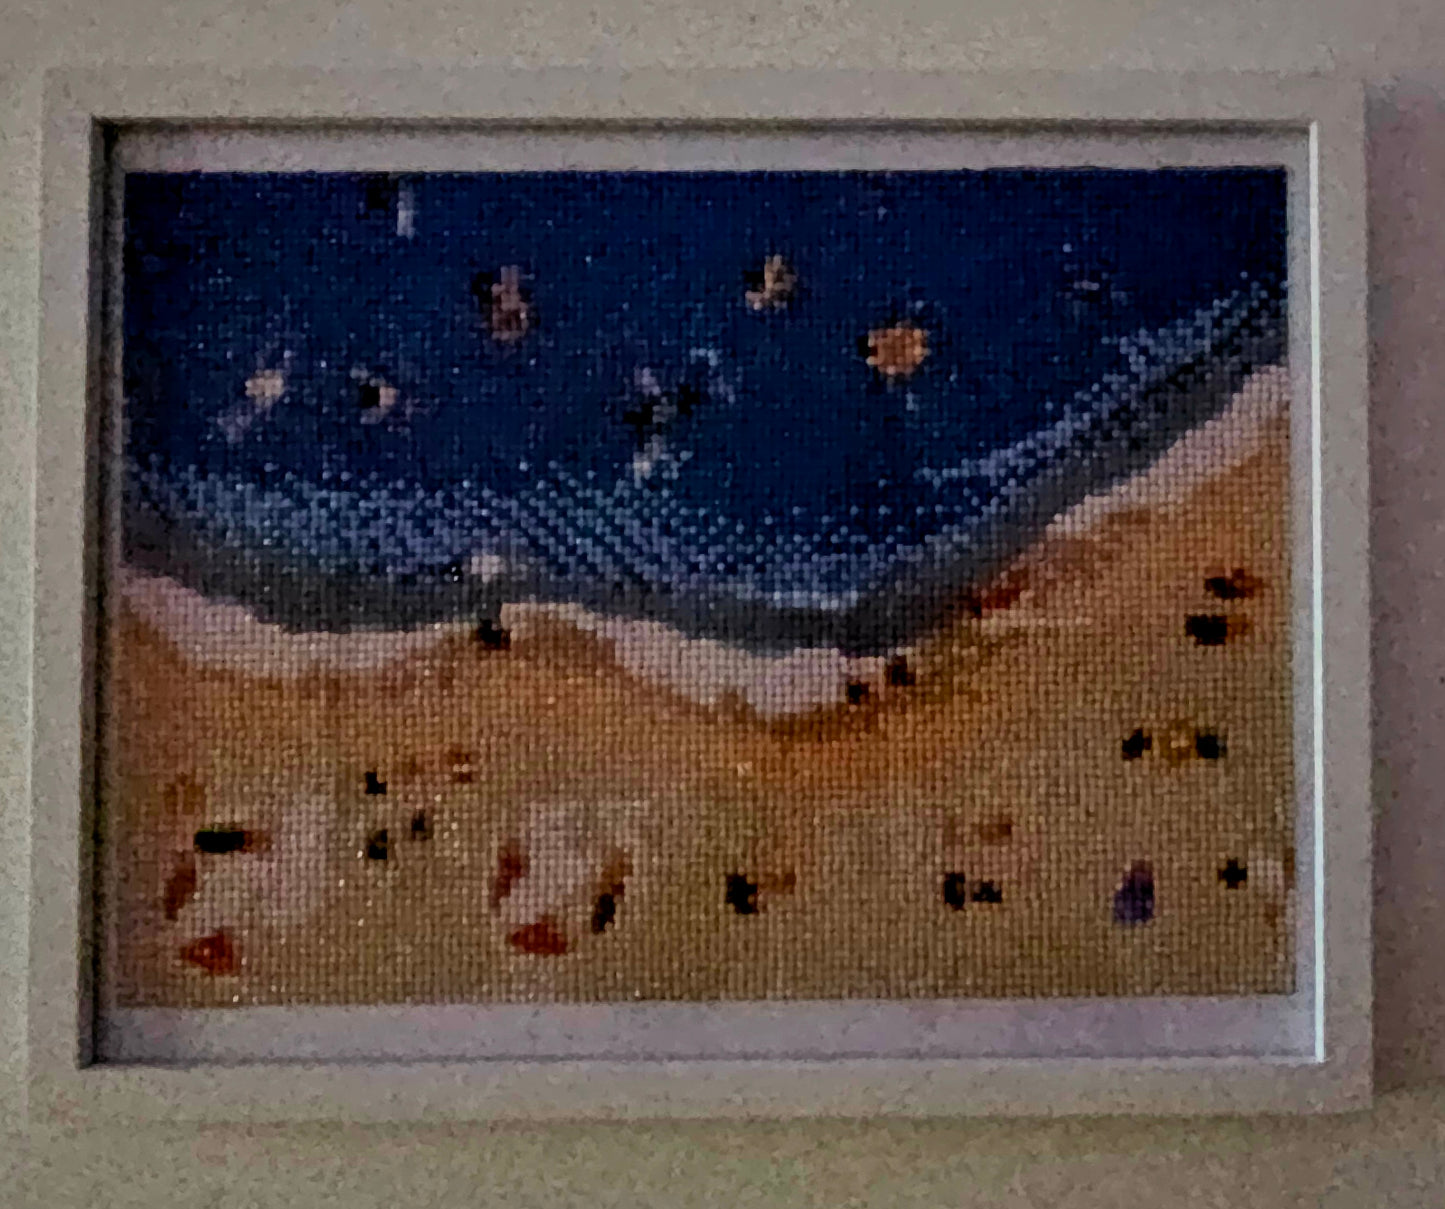 Groovy baby framed artwork - Summer by the sea